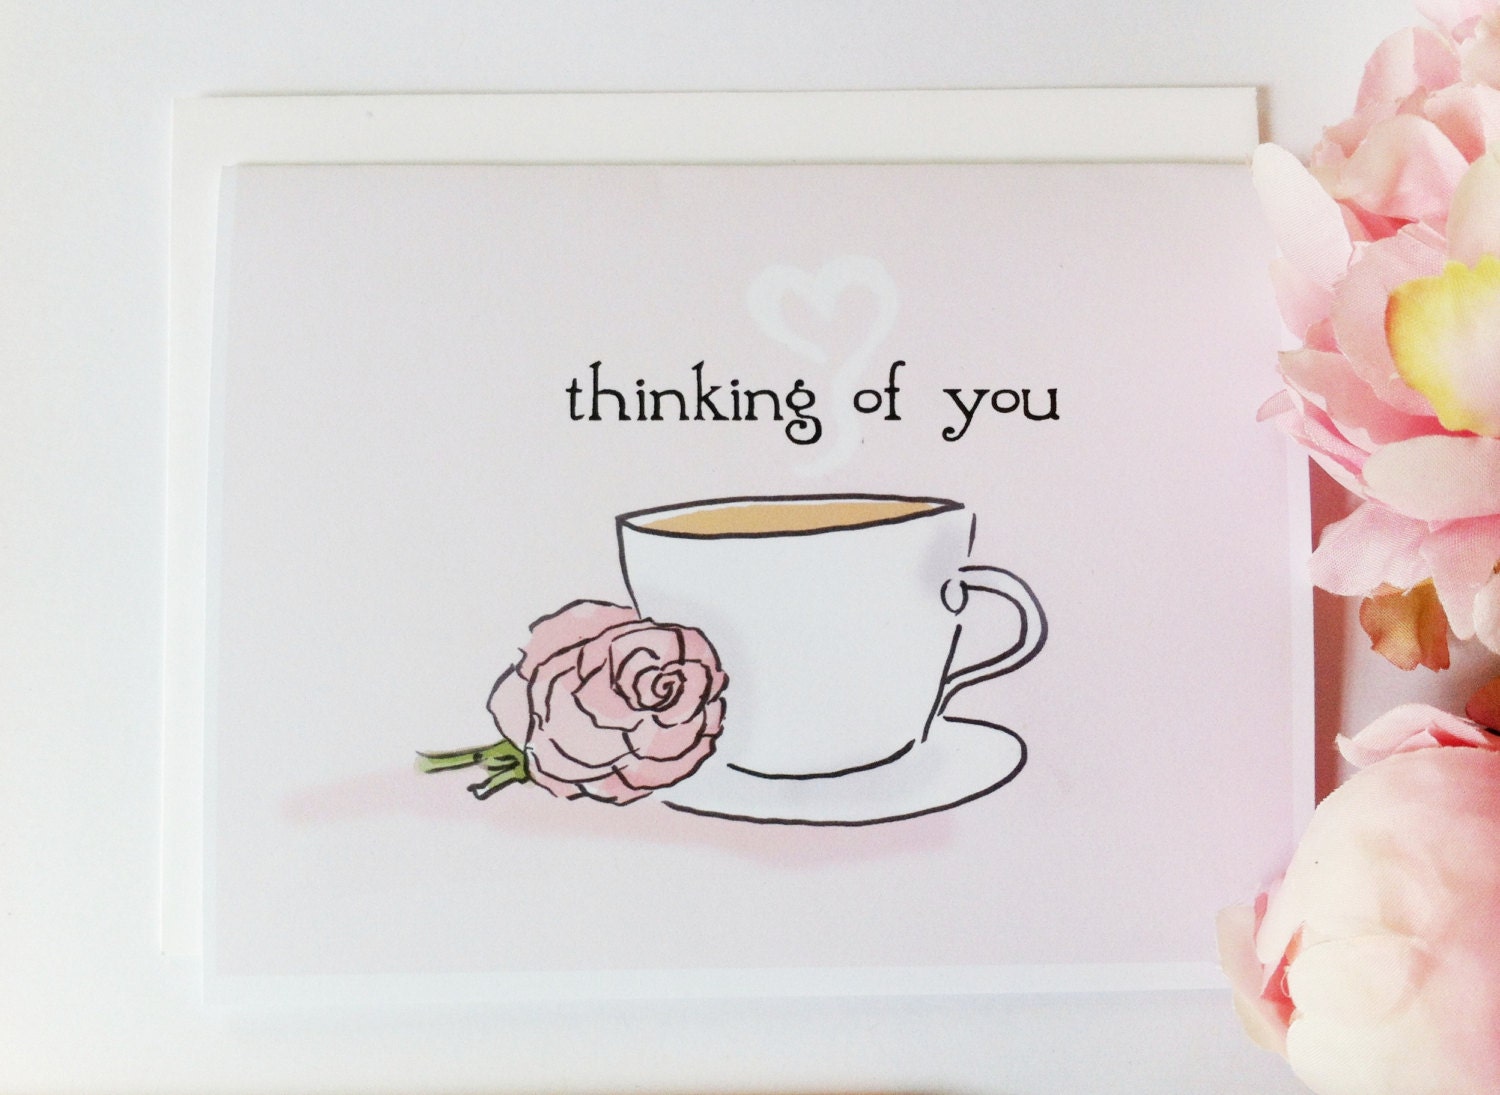 cards-thinking-of-you-thinking-of-you-card-cards-for-coffee